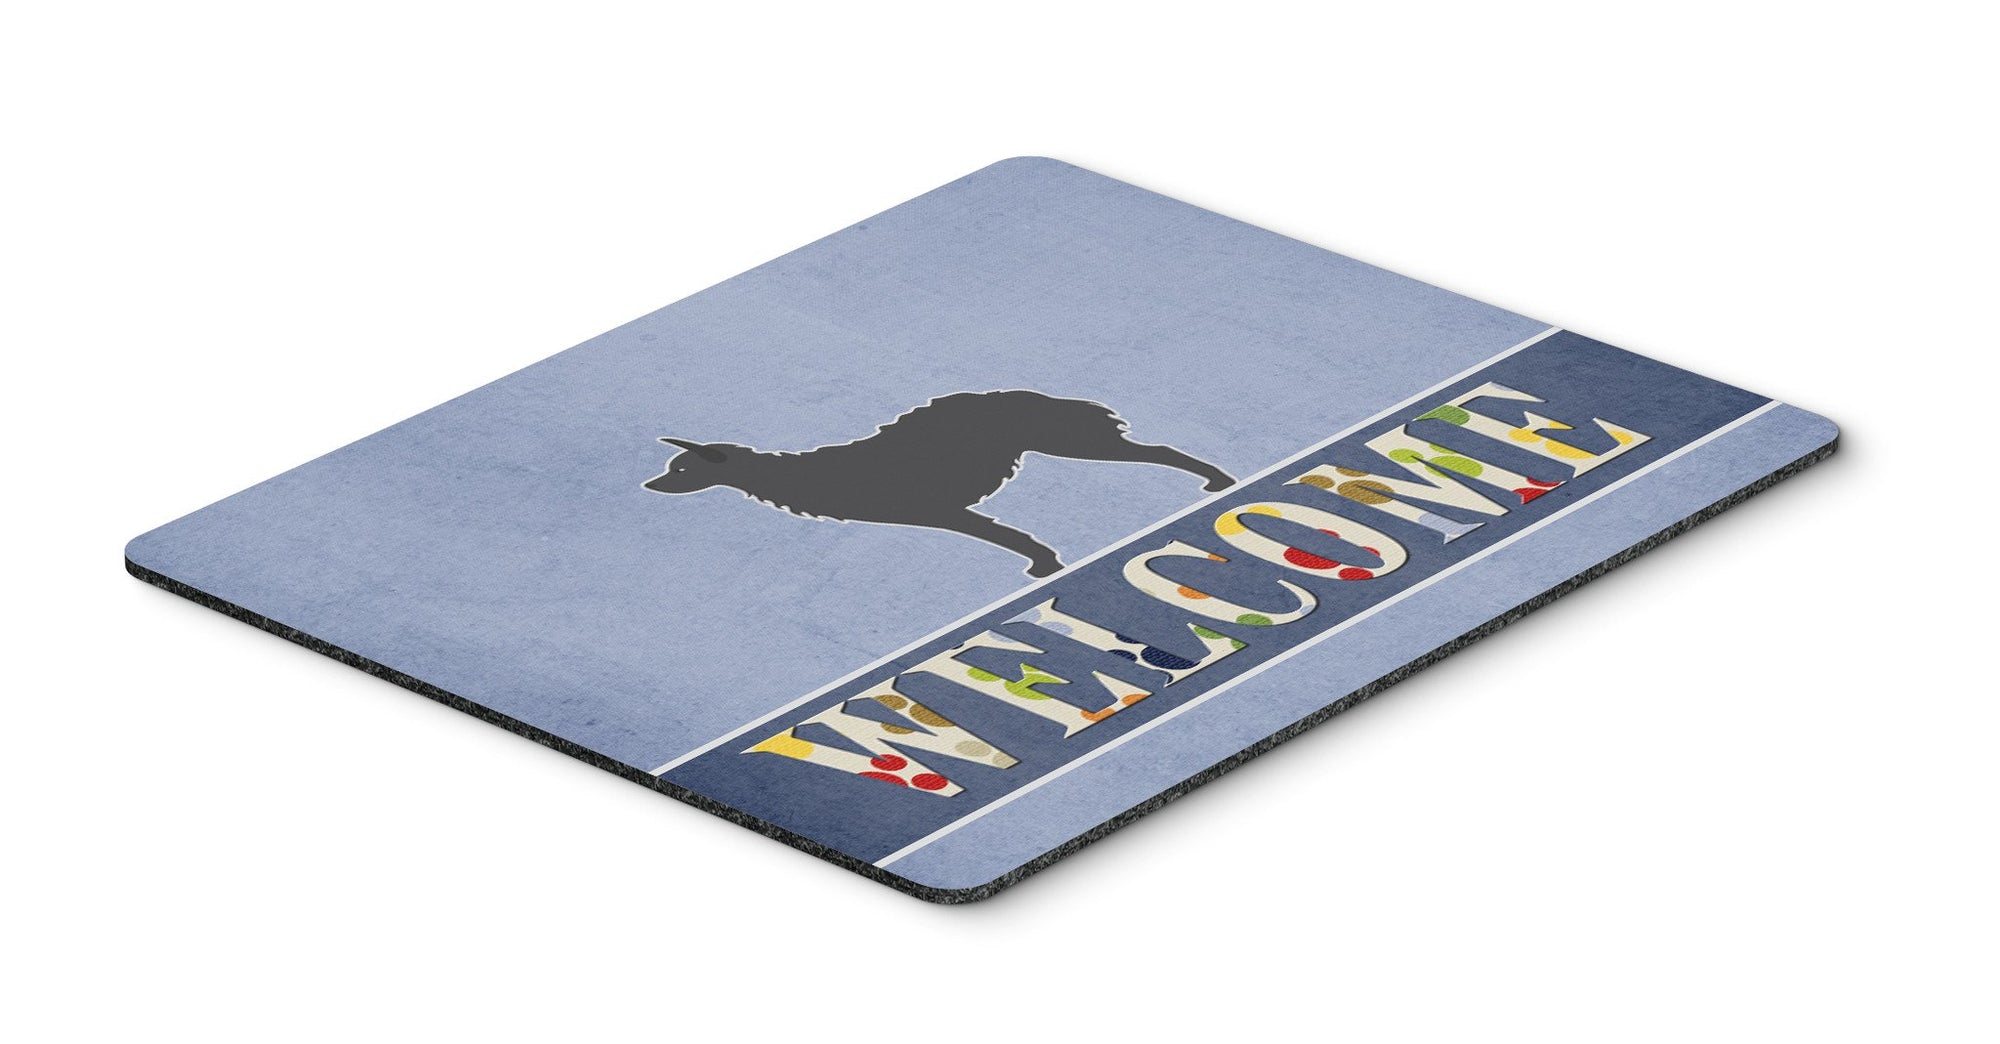 Croatian Sheepdog Welcome Mouse Pad, Hot Pad or Trivet BB5525MP by Caroline's Treasures